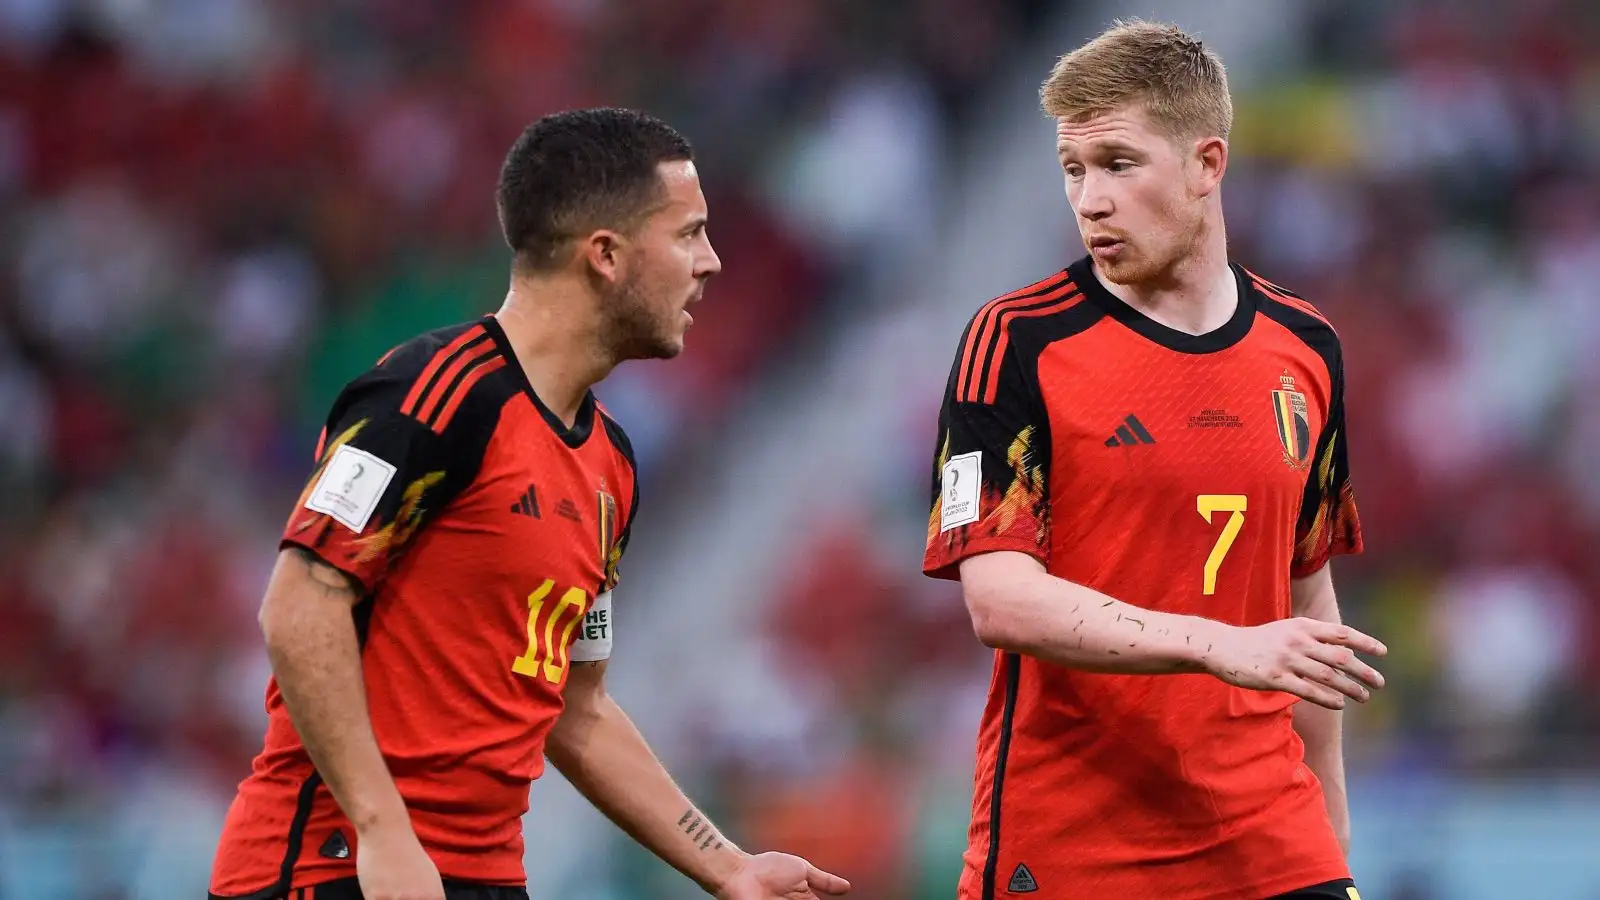 De Bruyne among Belgium trio ‘pulled apart’ in dressing room as ‘tempers erupt’ after Morocco defeat